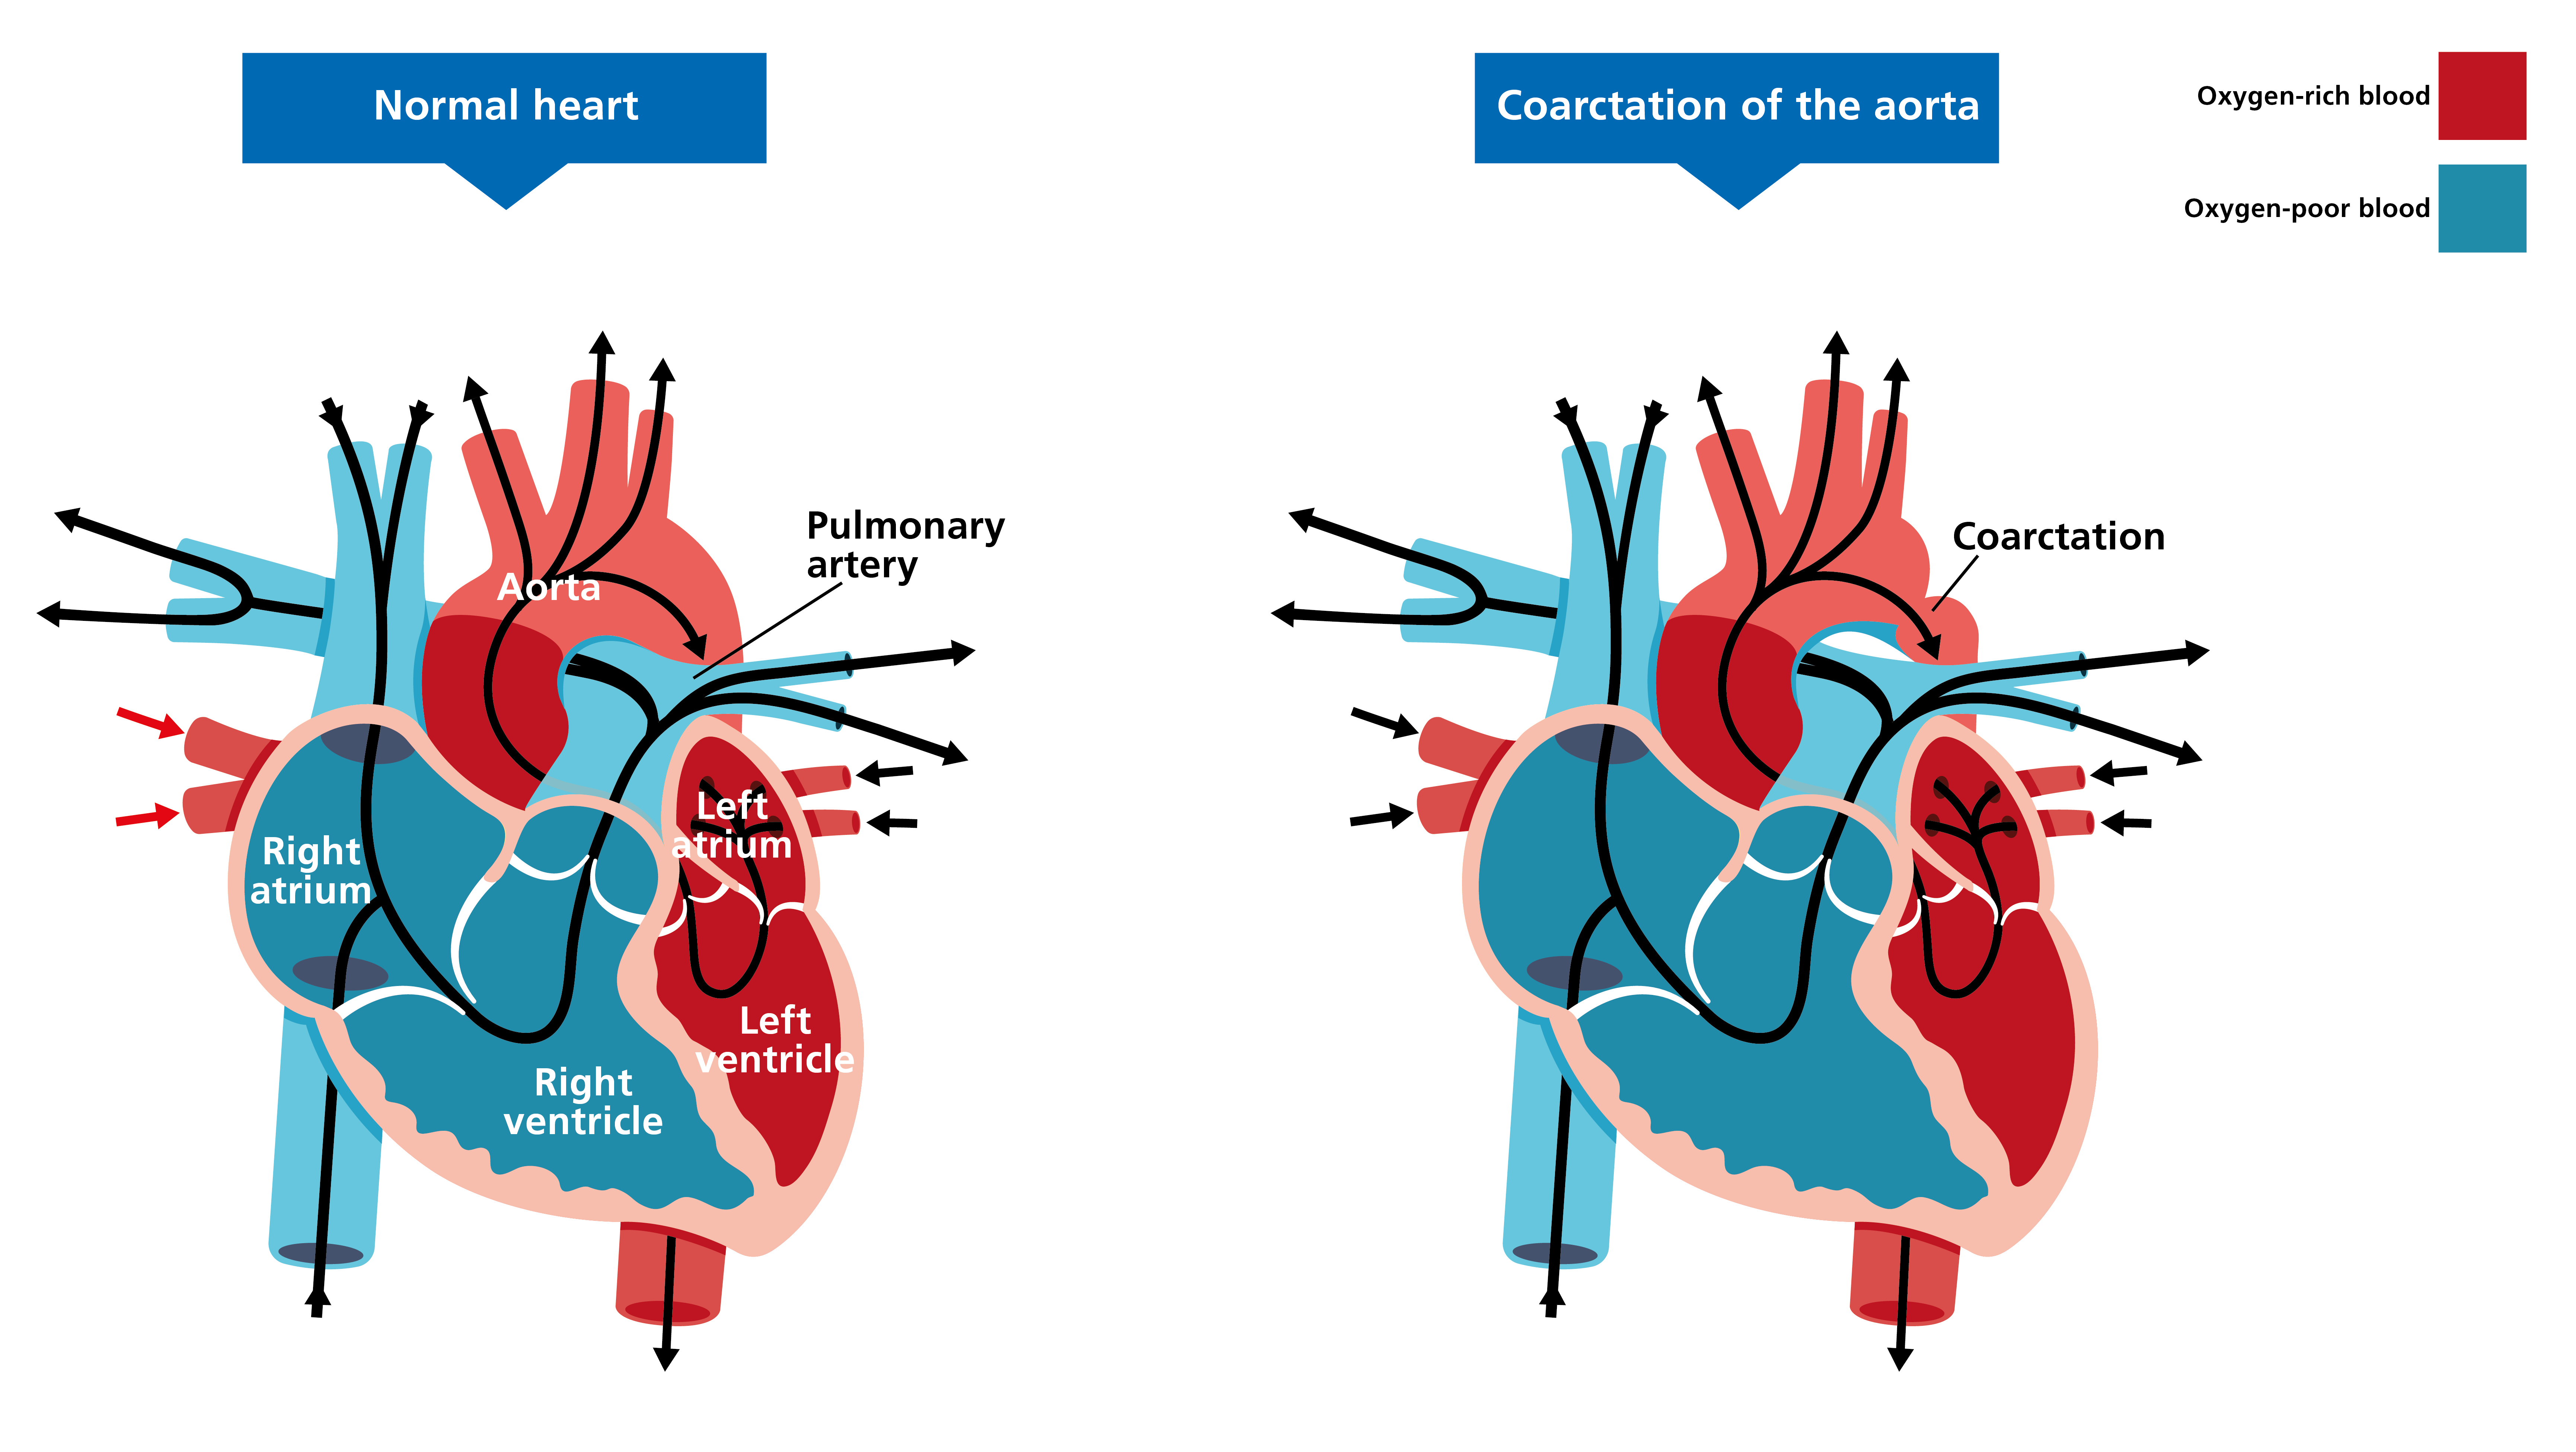 Two illustrated diagrams of hearts, side by side. The one on the left shows a normal heart. The one on the right shows a heart affected by coarctation of the aorta. The affected heart looks the same as the normal heart, except for a pinch-like narrowing of the aorta.